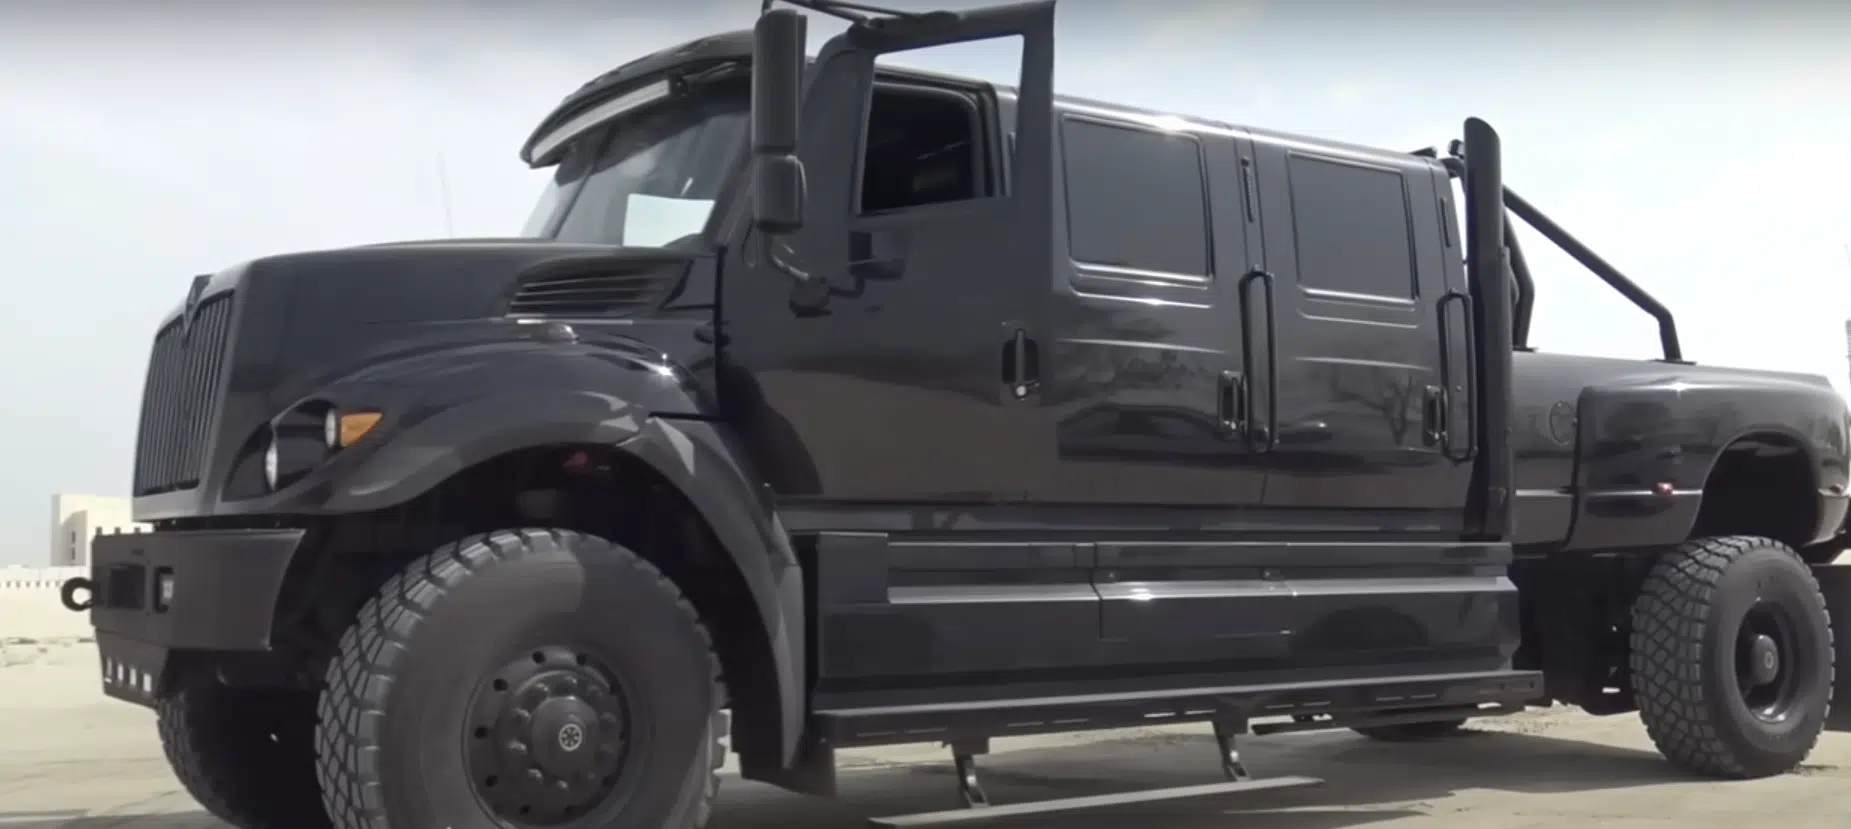 WATCH: This $500,000 Monster Pickup Truck is a real beast